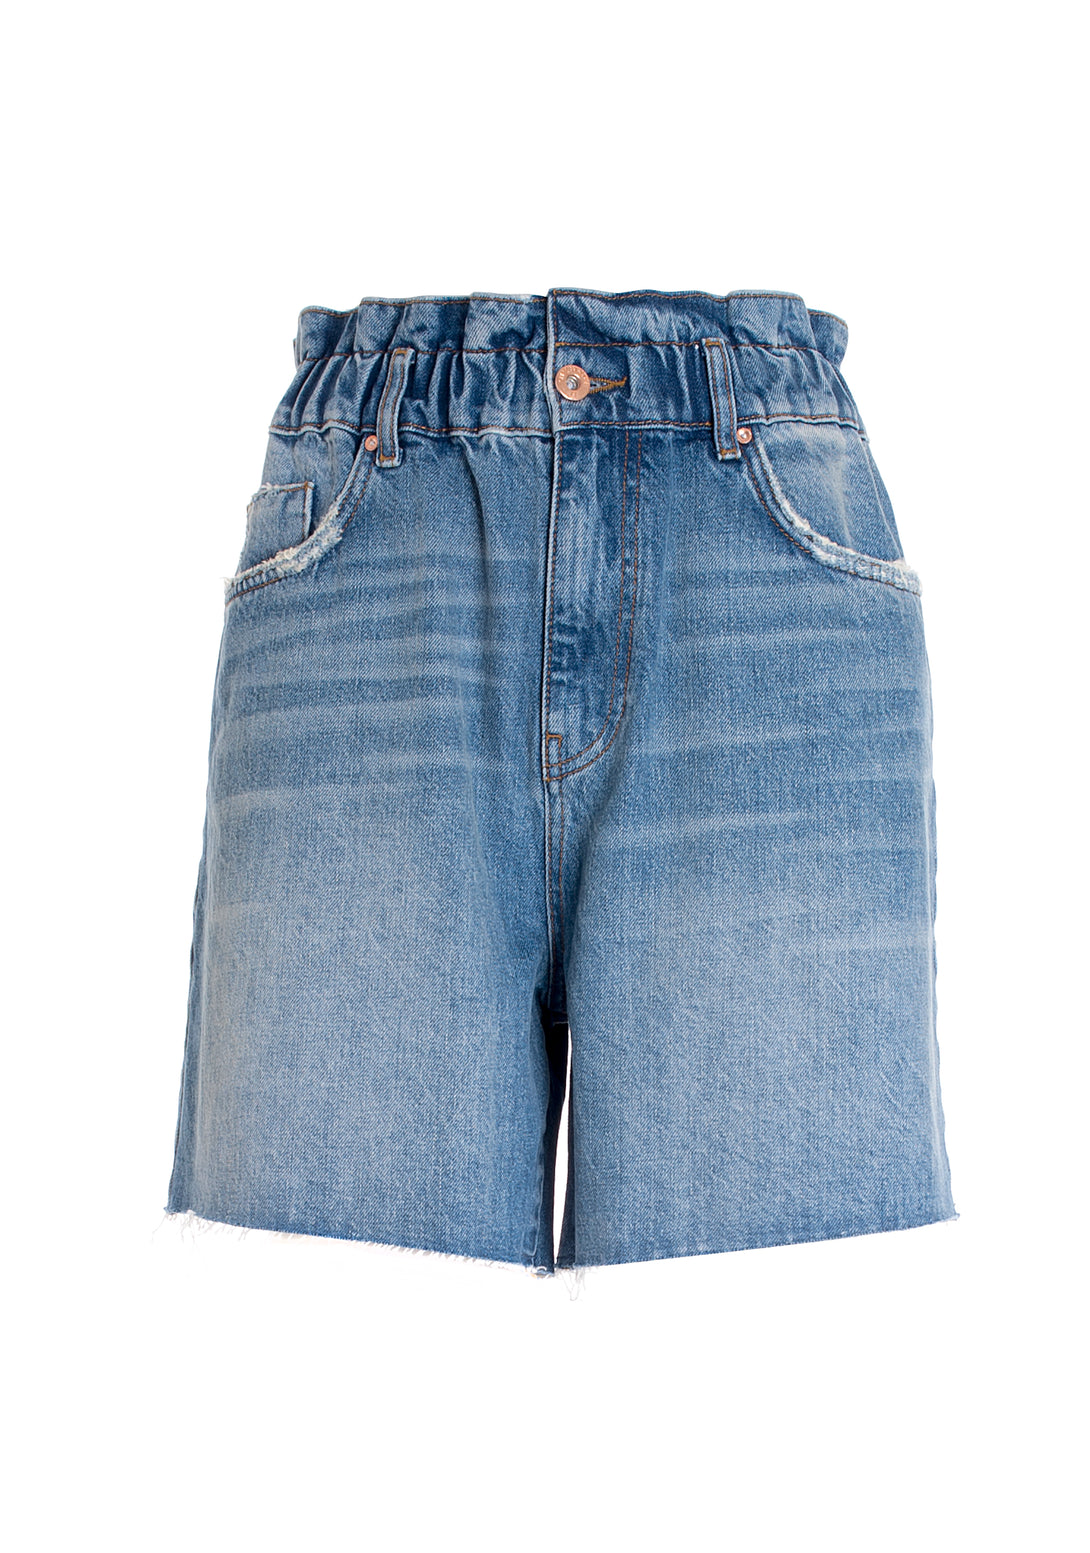 Bermuda wide fit made in denim with middle wash